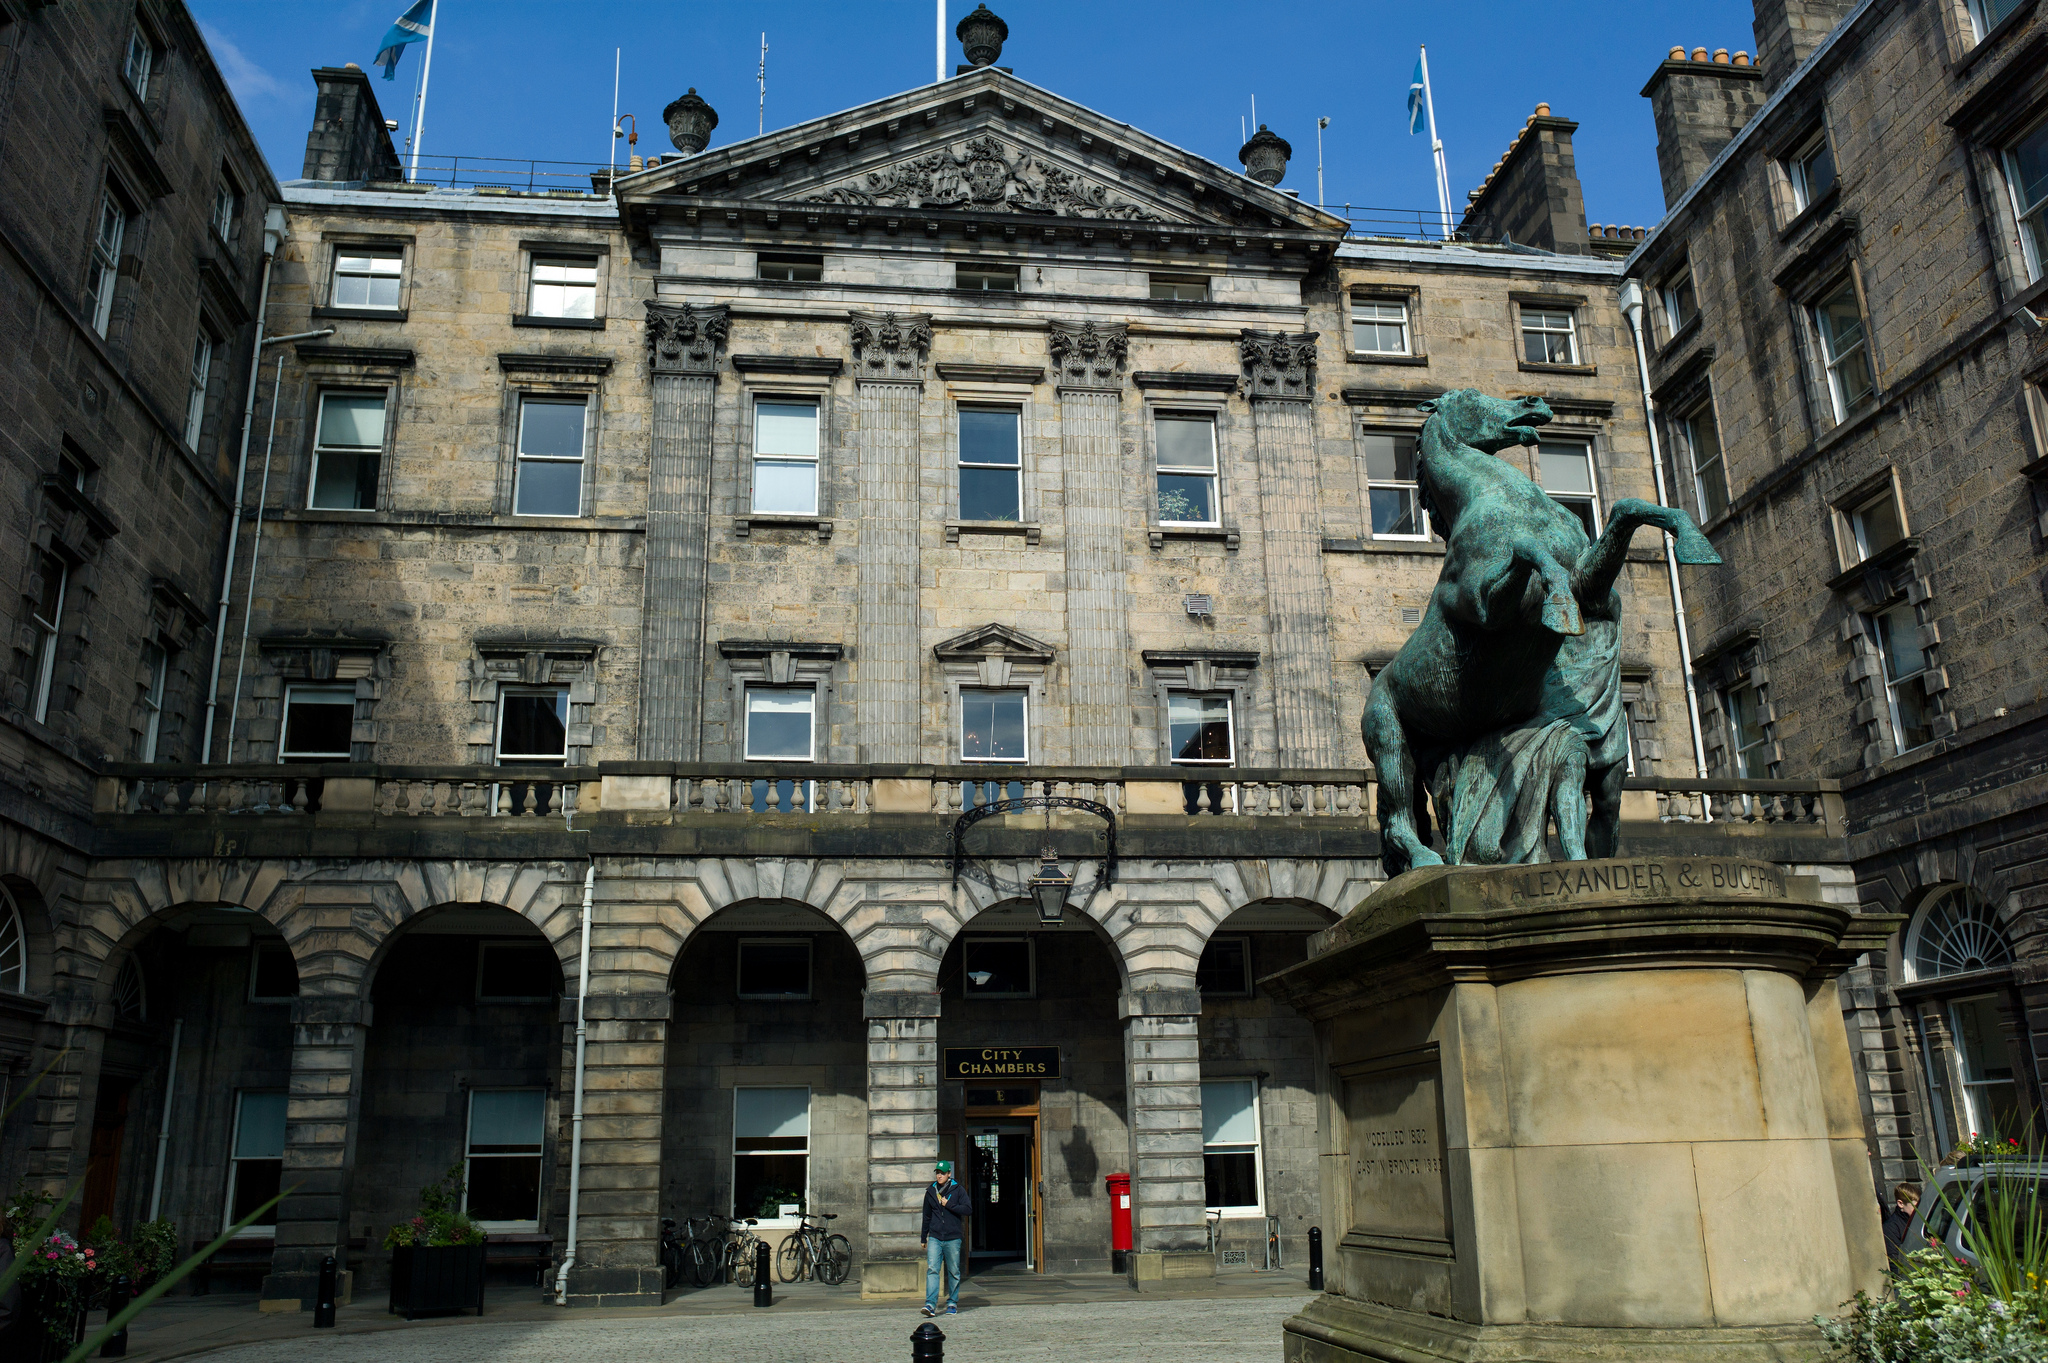 Edinburgh councillors prioritise poverty, climate and vital services as budget balanced